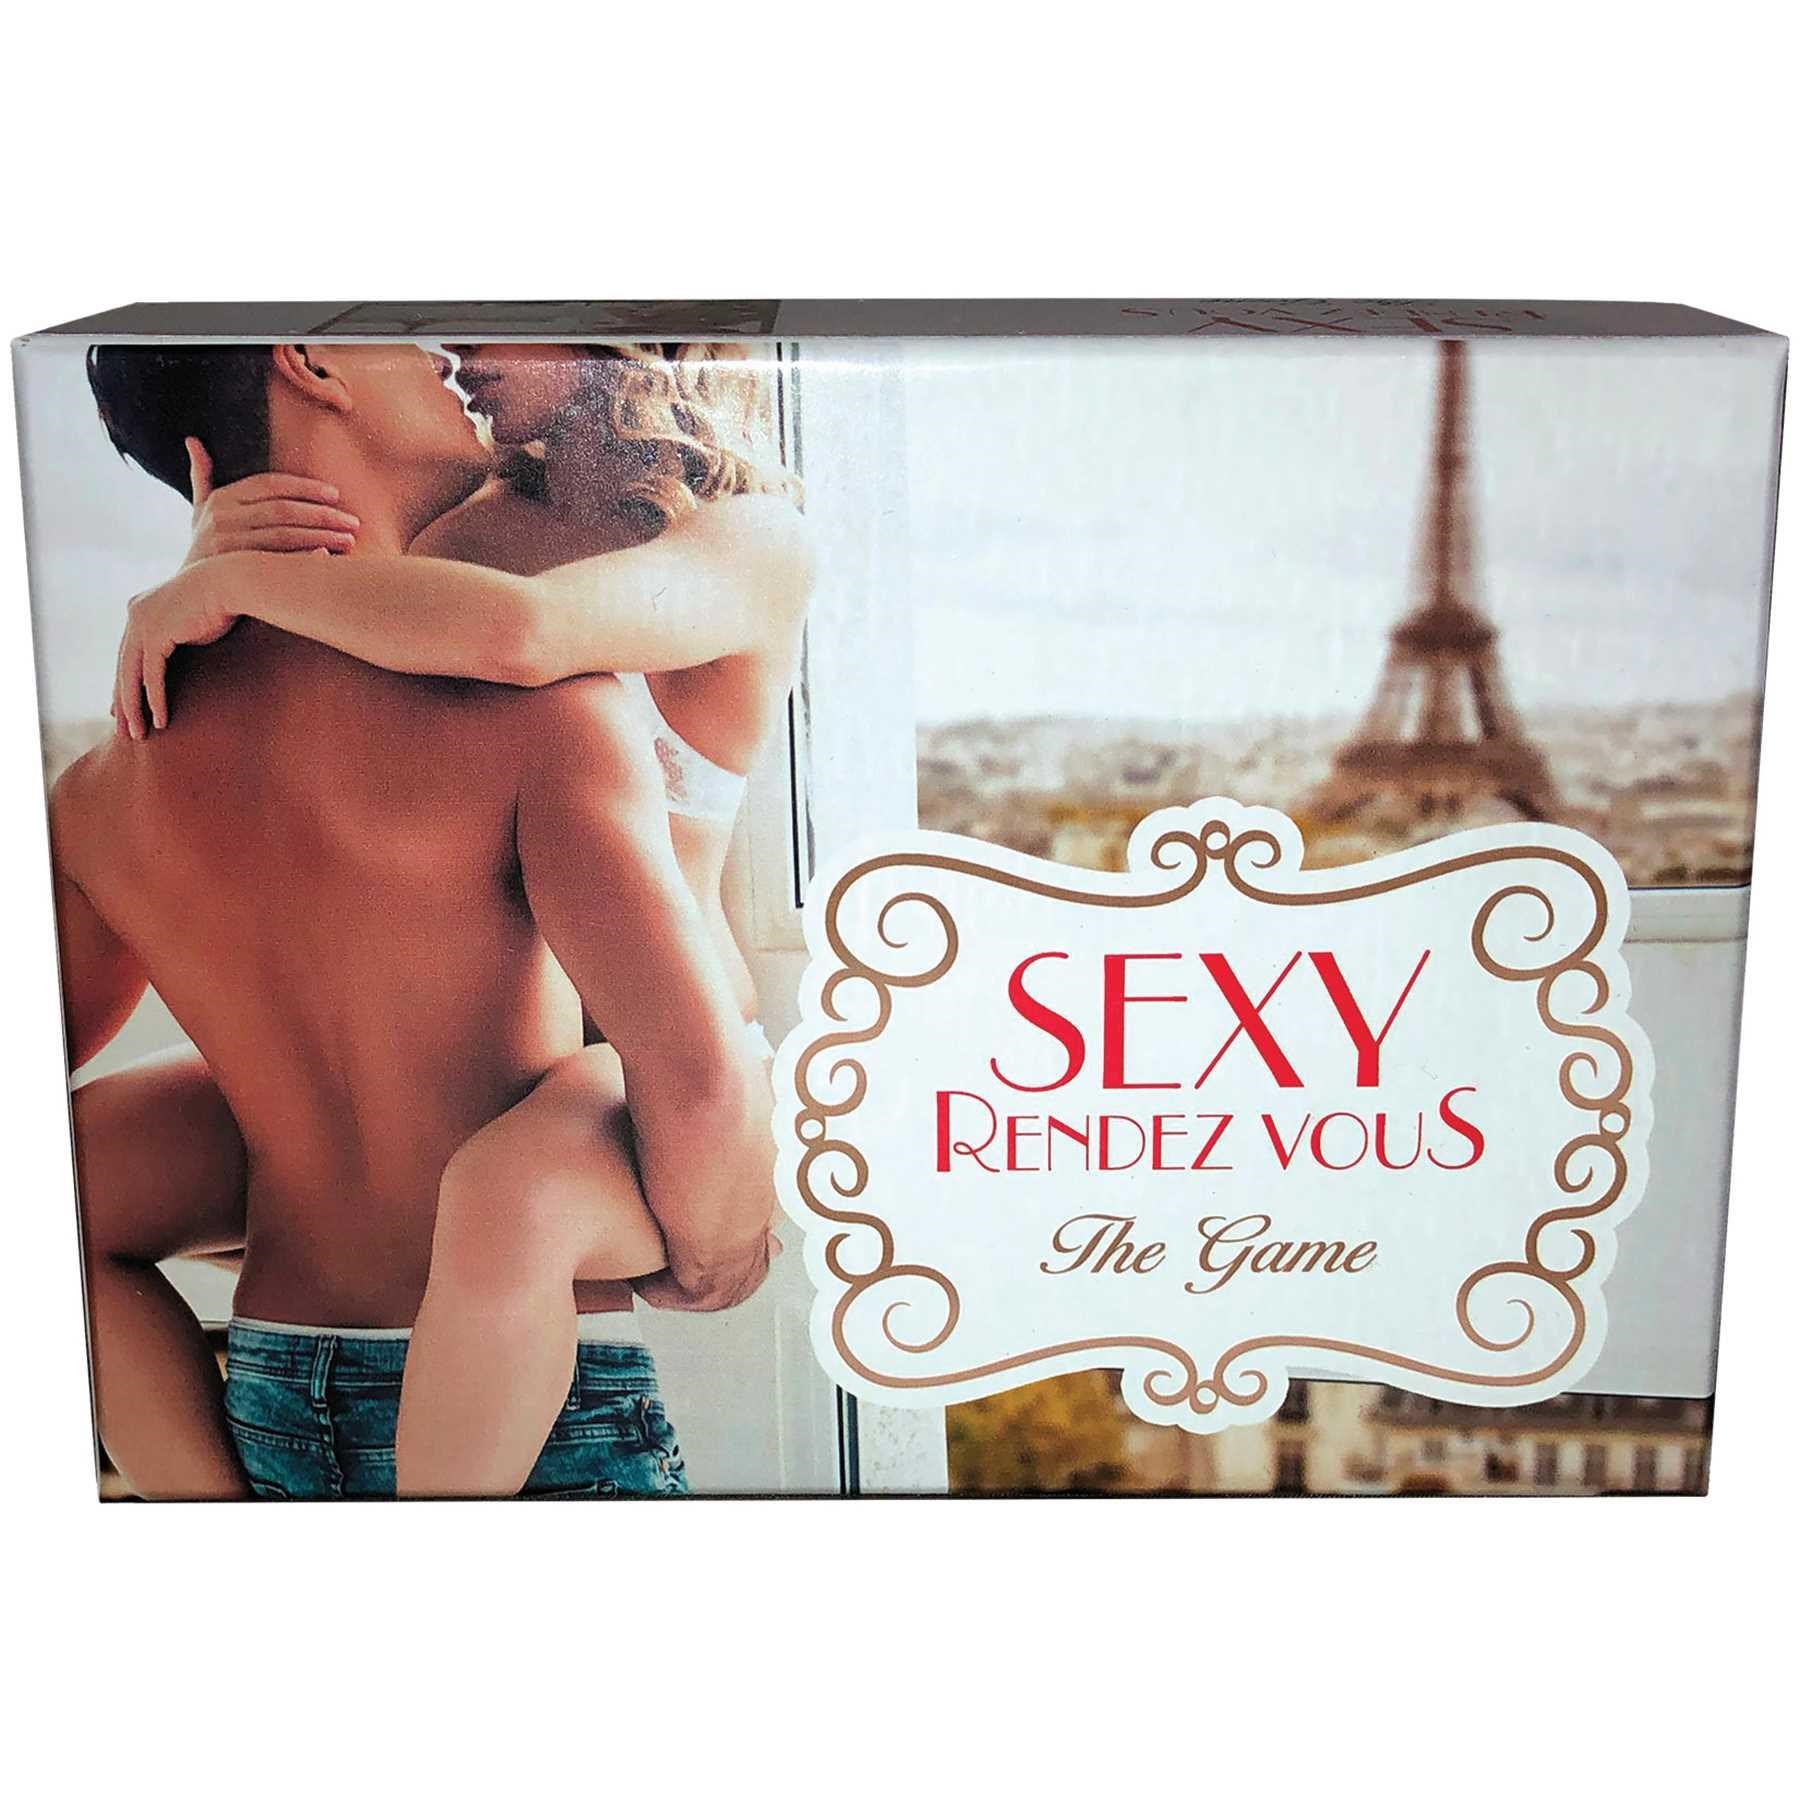 E432 sexy rendezvous game box image only